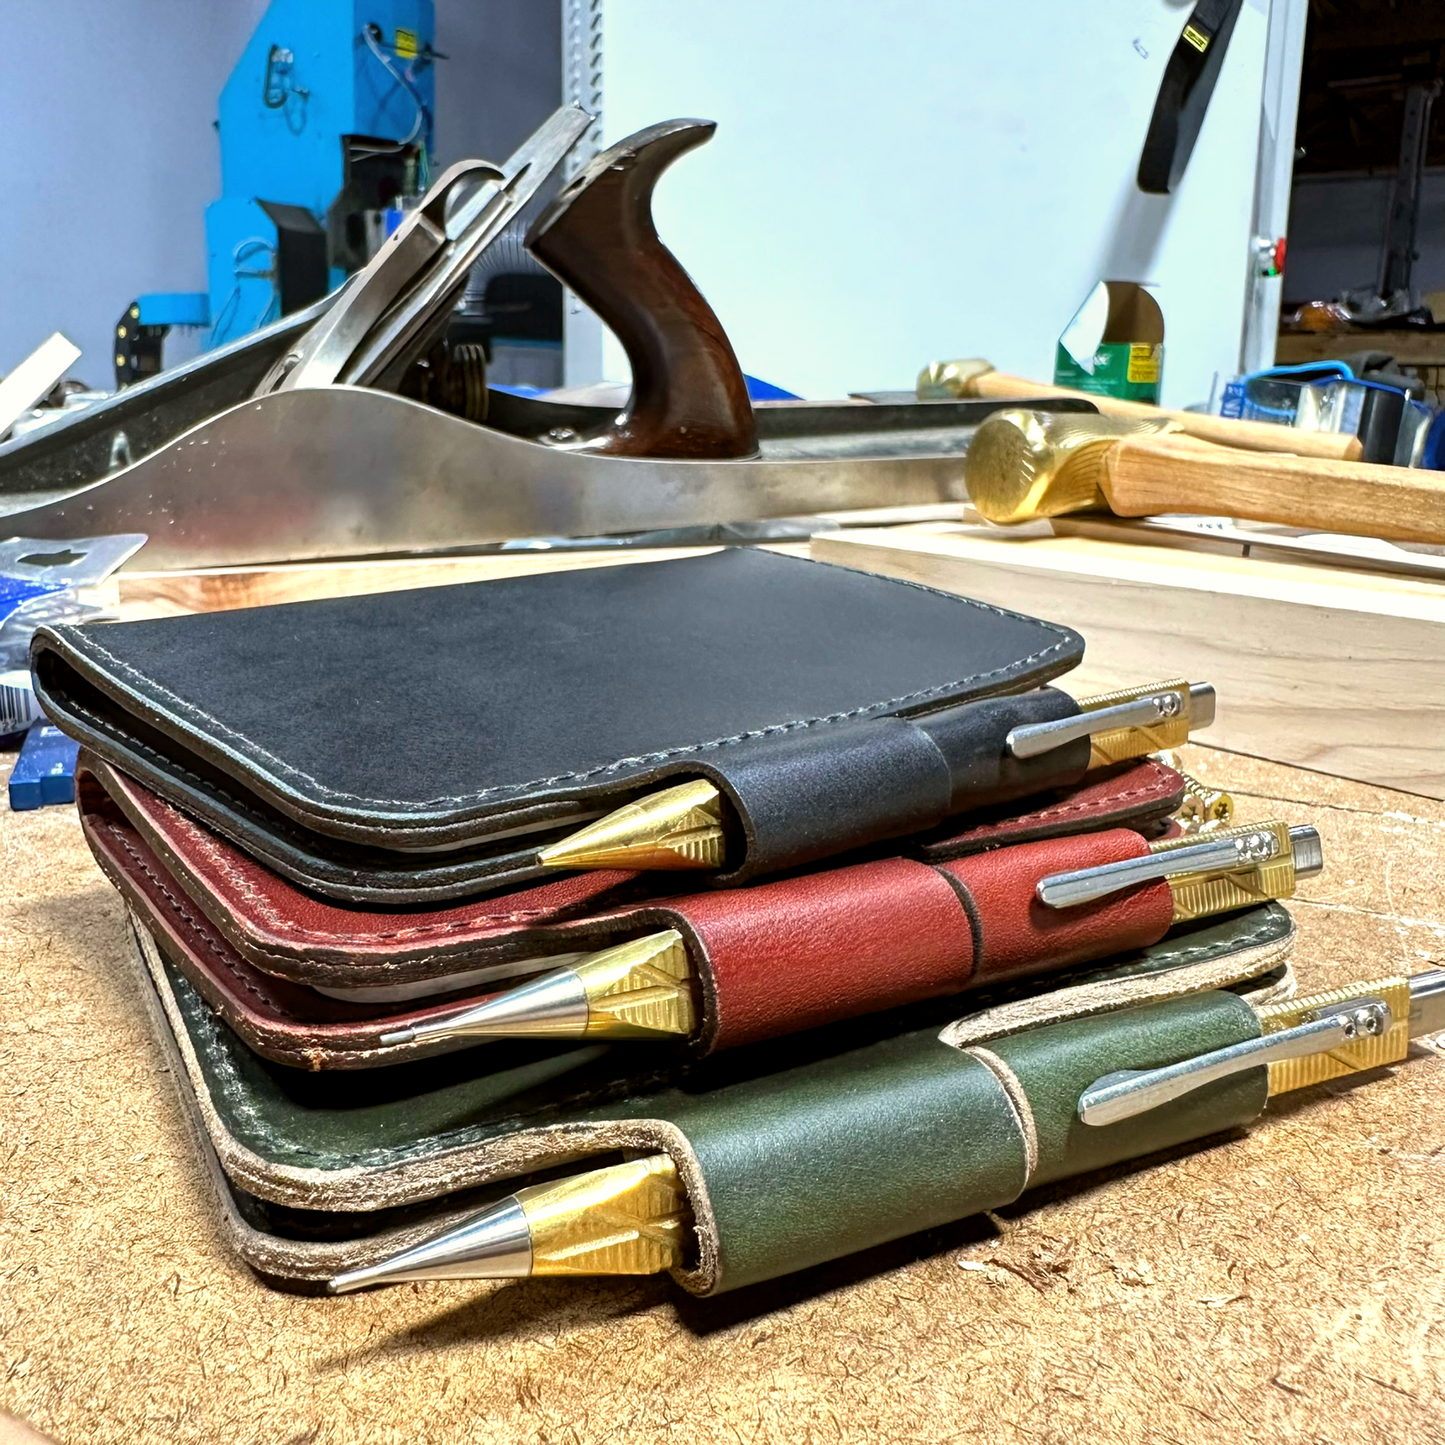 Leather Notebook Cover 3.5in x 5.5in Compatible with Field Notes SHIPS END OF MAY